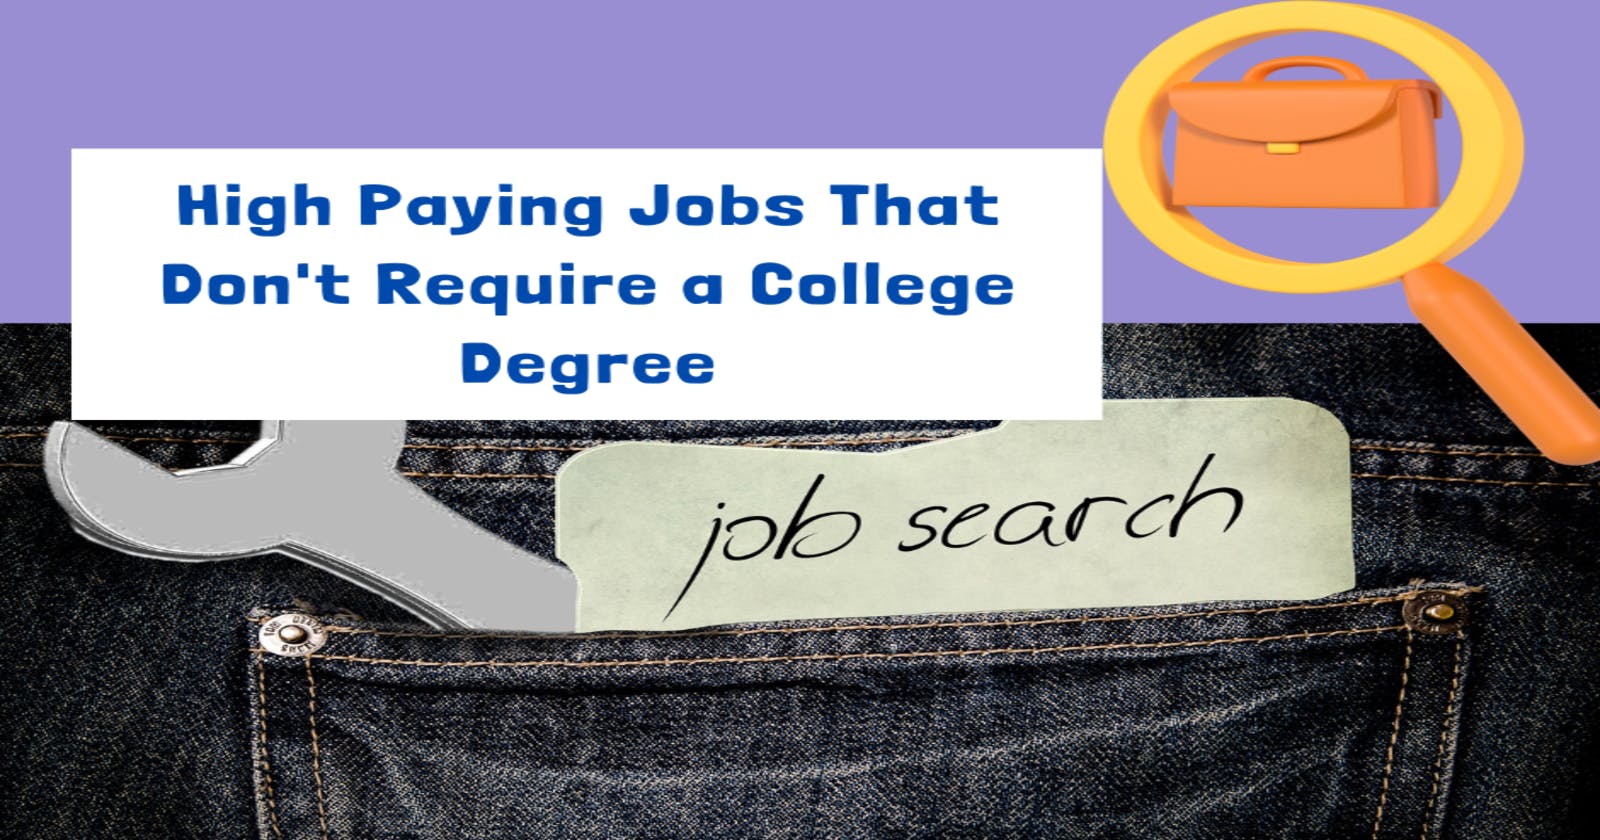 High Paying Jobs That Don't Require a College Degree